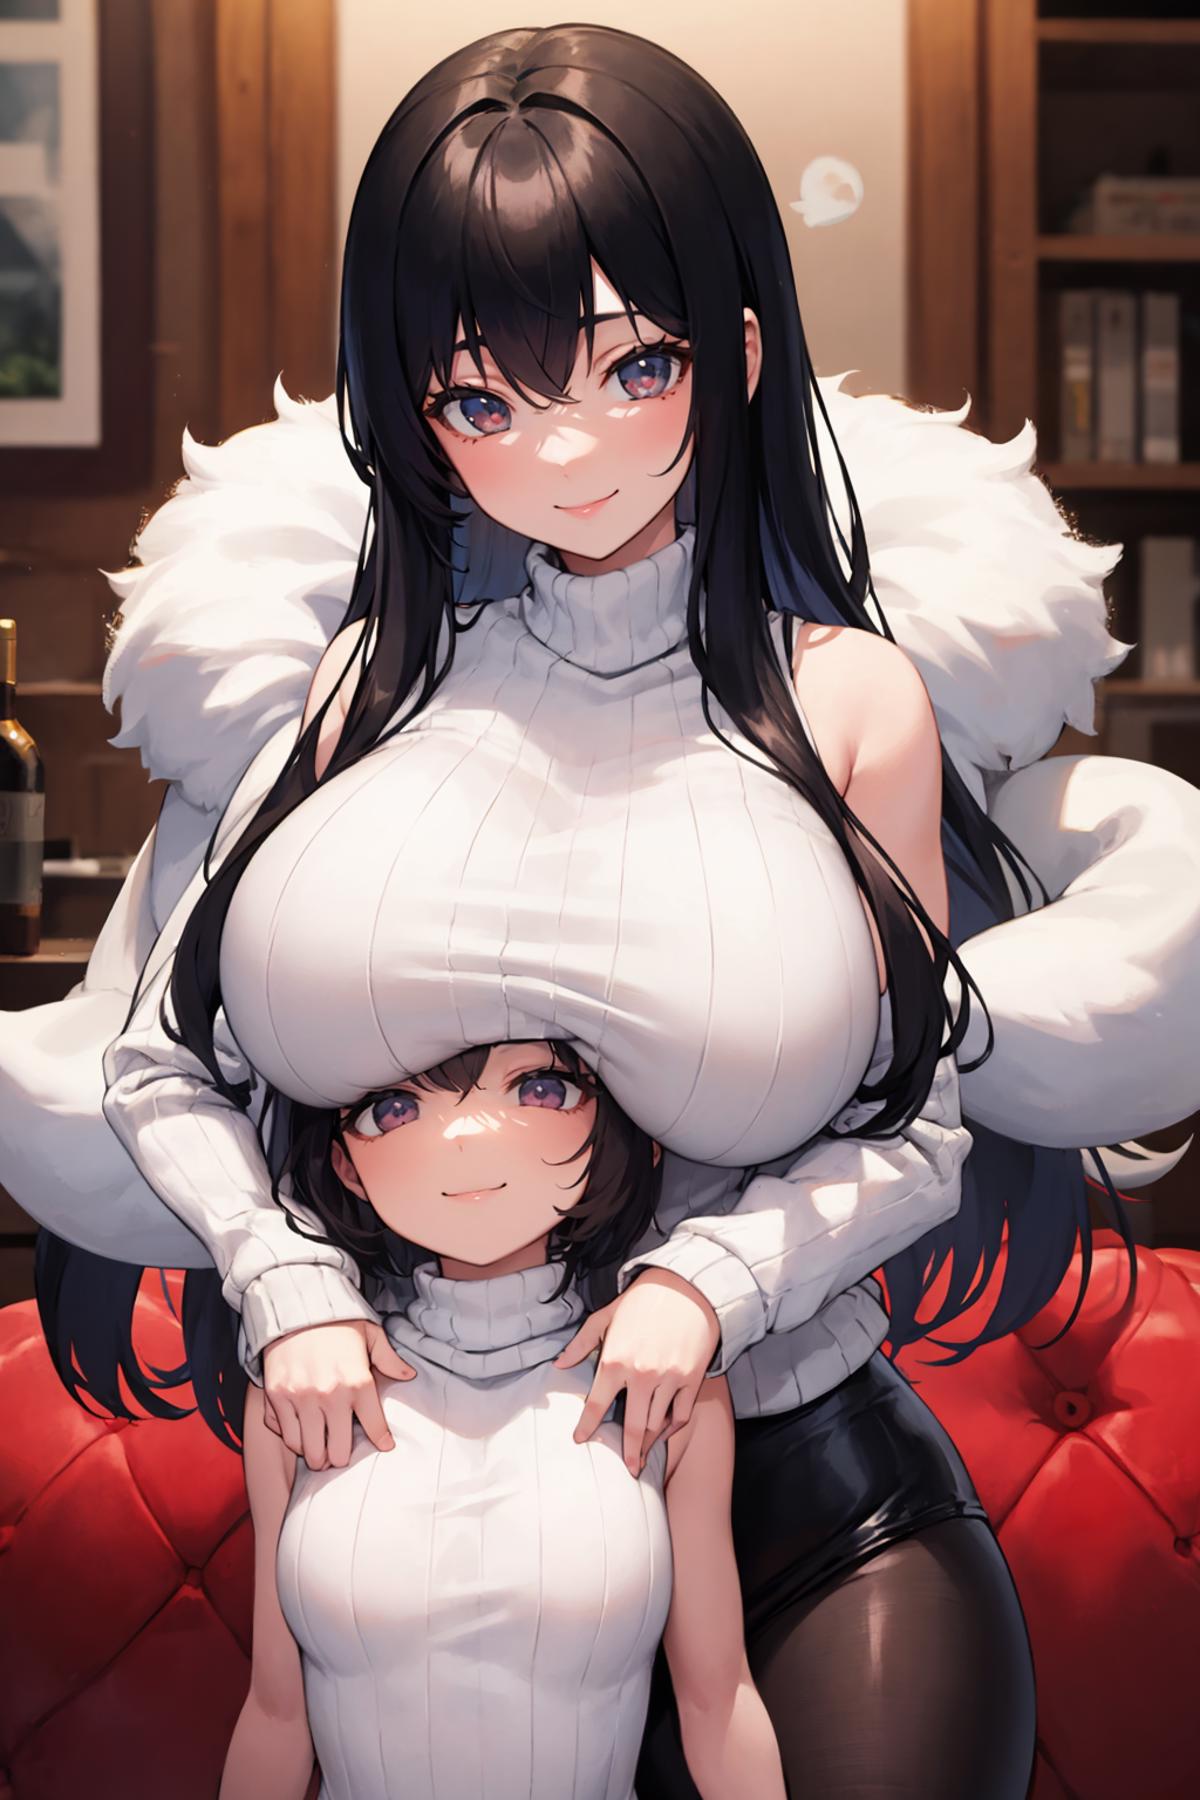 A digital art image of a woman sitting on a red chair with a smaller woman on her lap, both wearing white tops. The smaller woman is smiling and has her head resting on the larger woman's chest.